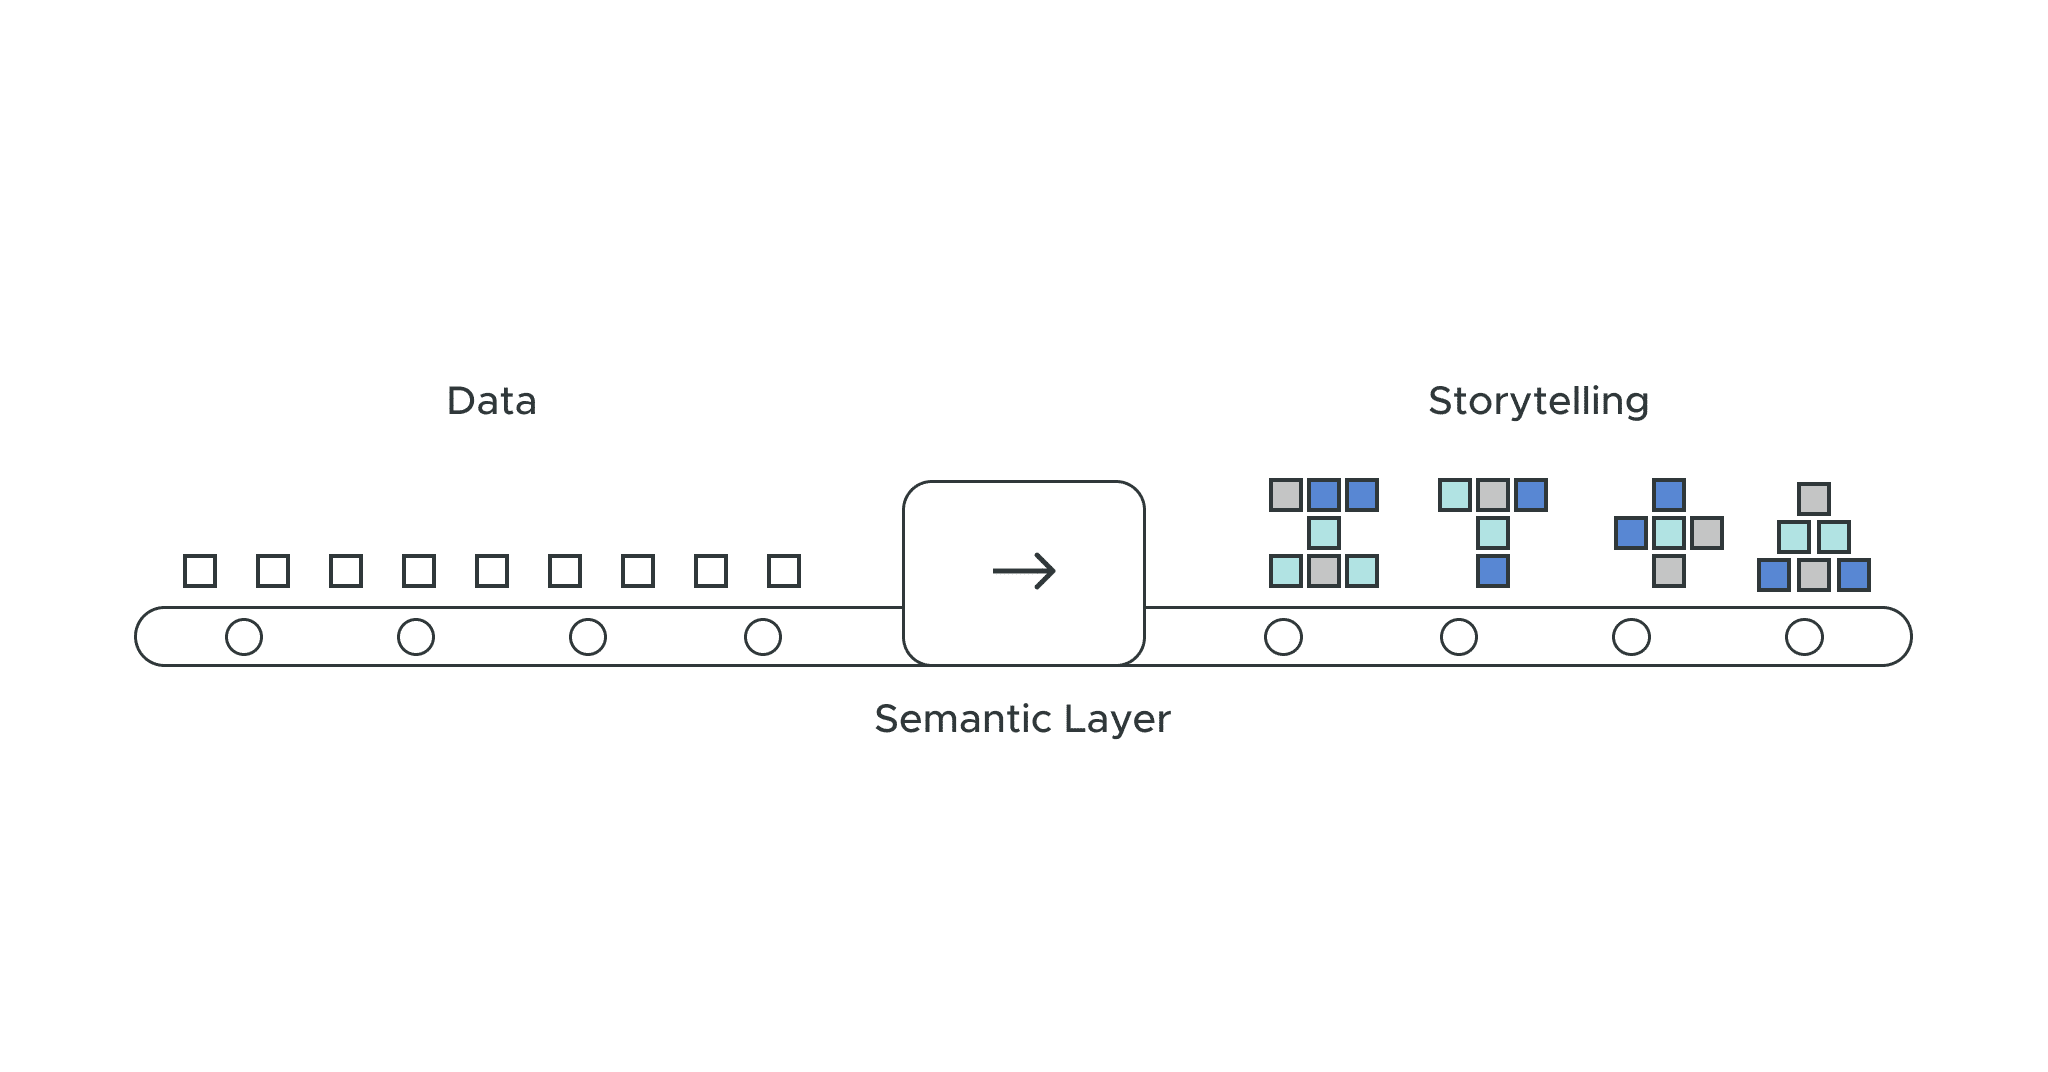 How does a Semantic Layer support Data Storytelling?